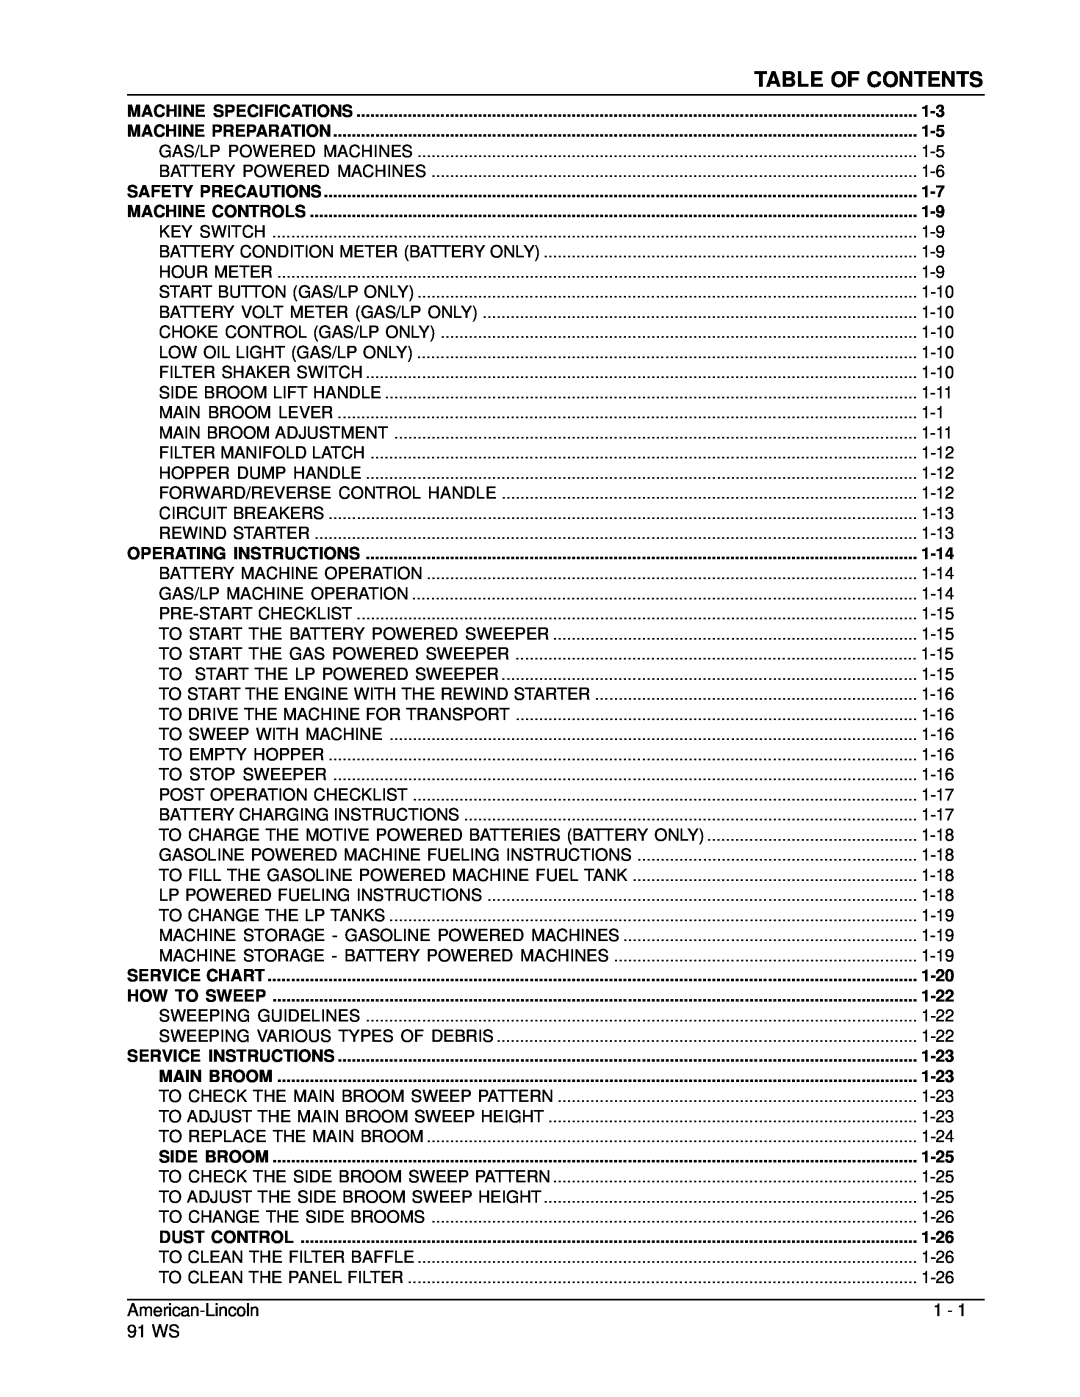 Nilfisk-ALTO 91WS manual Table Of Contents, 1-14, 1-20, 1-22, 1-23, 1-25, 1-26 